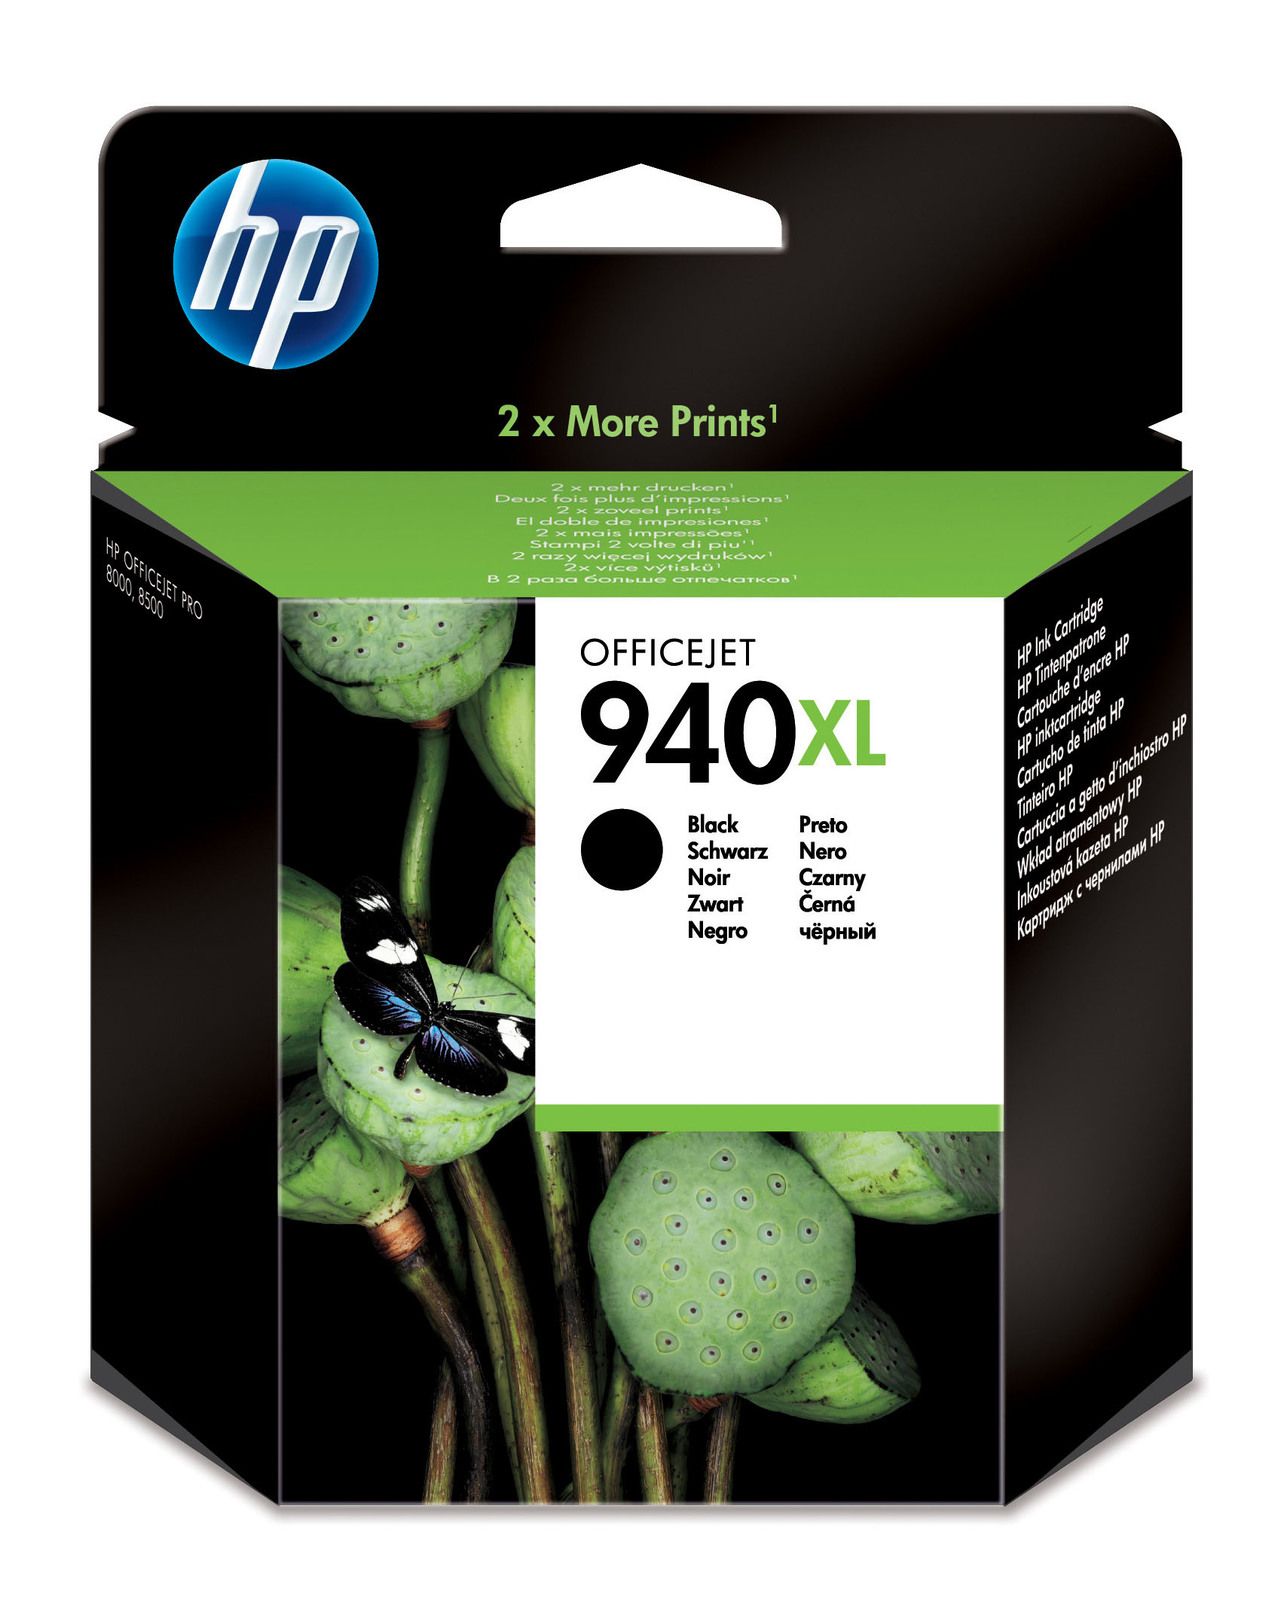 Related to Officejet Pro 8000 Ink: C4906AE